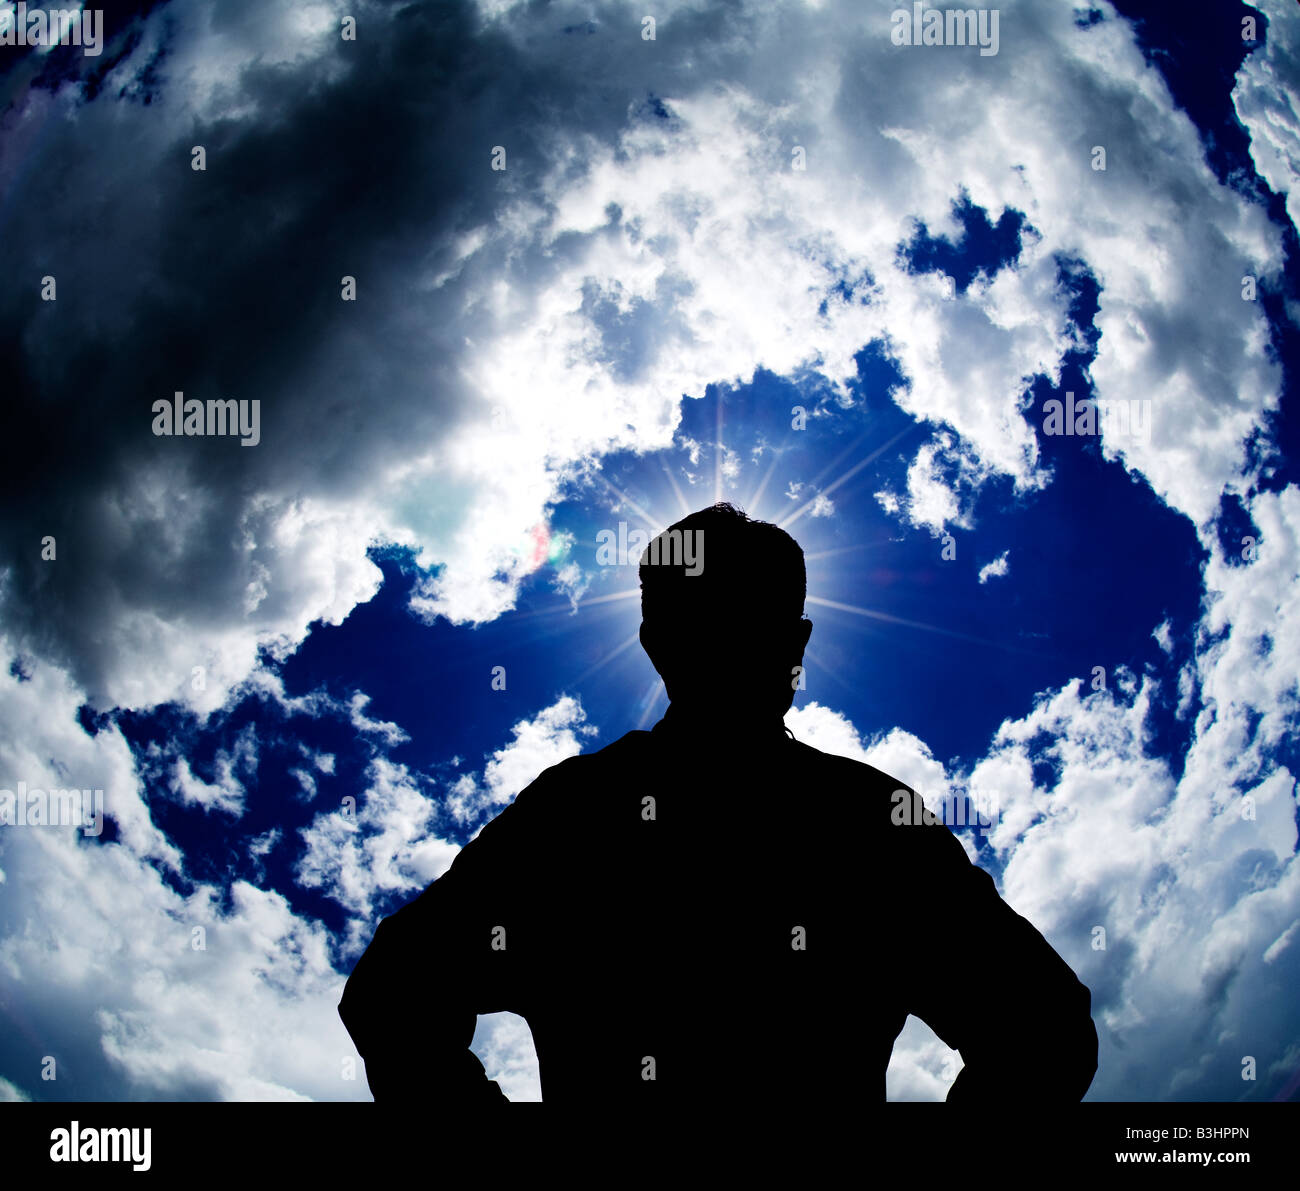 man looking at bright spot in stormy sky Stock Photo